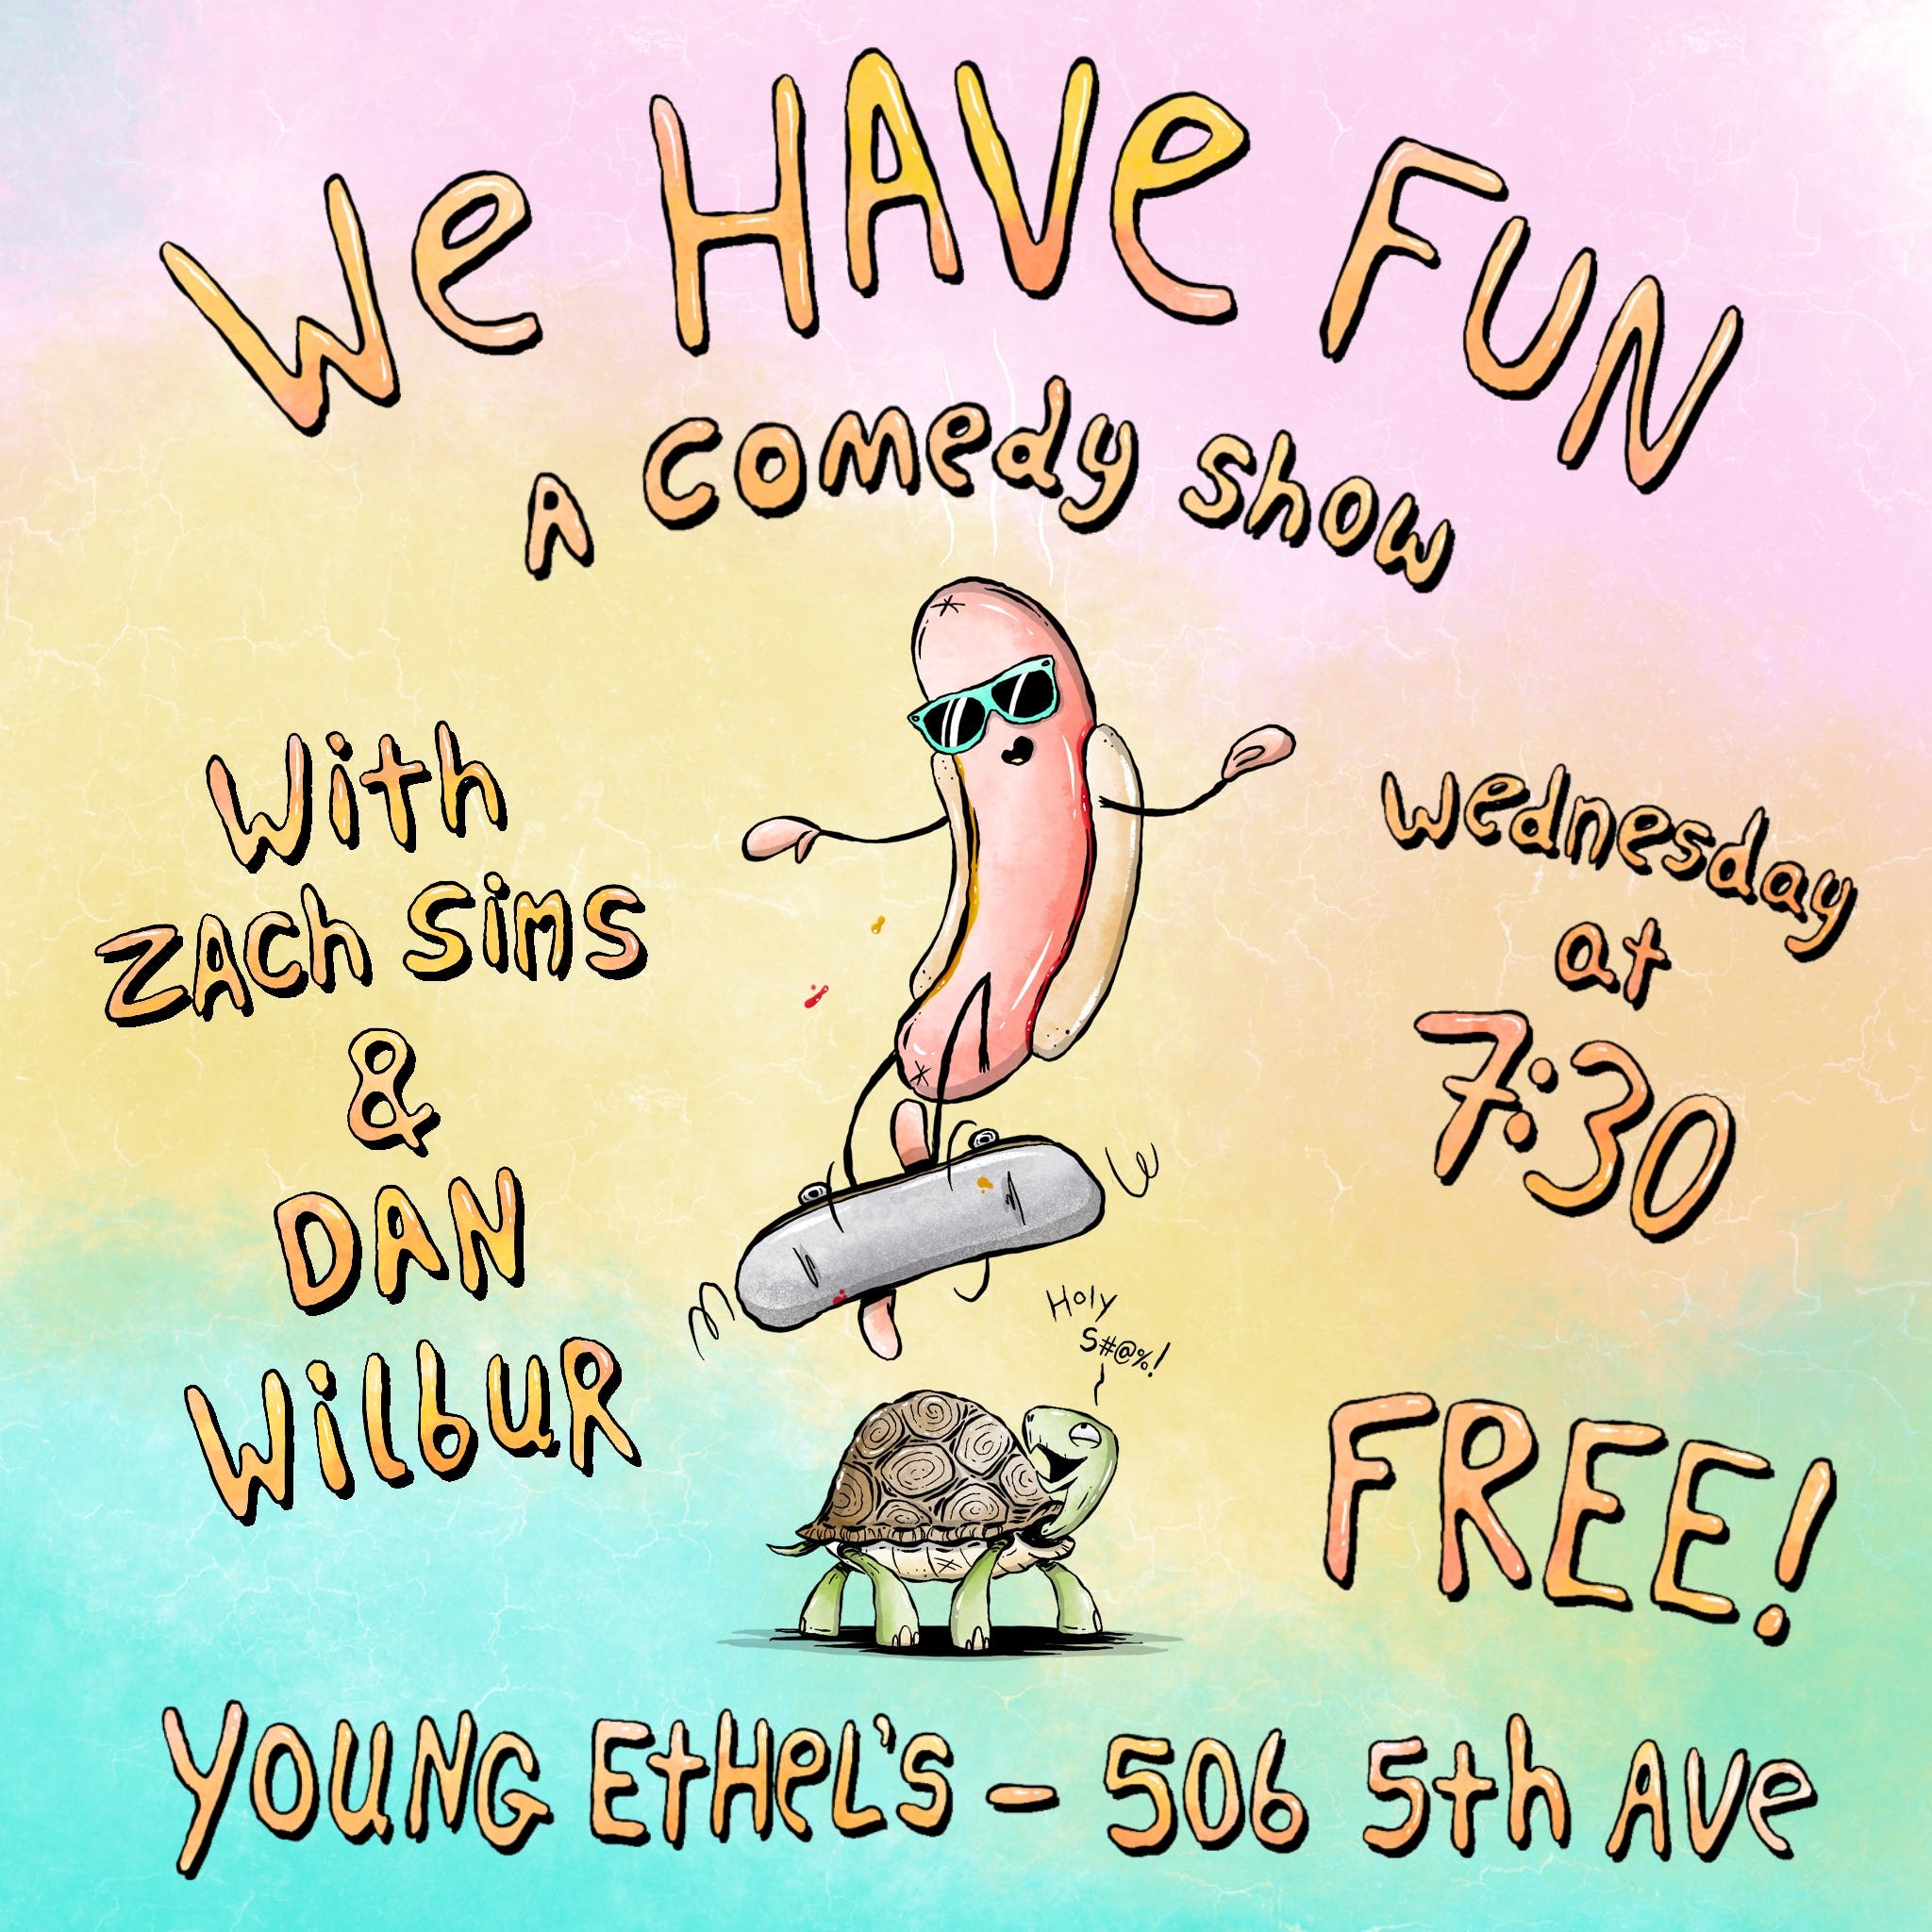 We Have Fun: A Free Comedy Show